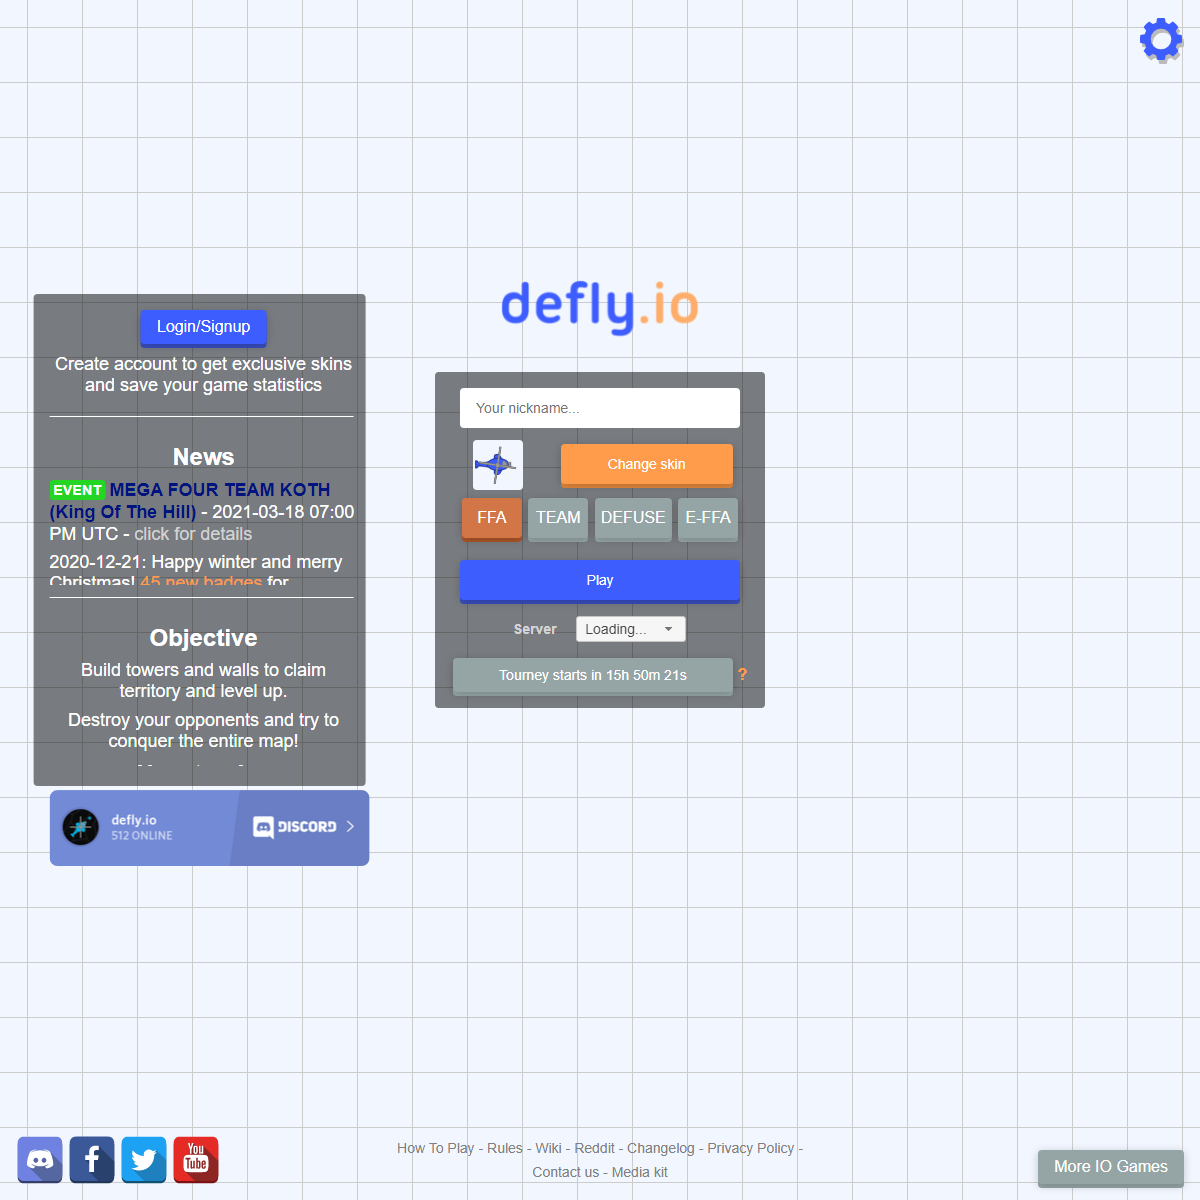 A complete backup of https://defly.io/